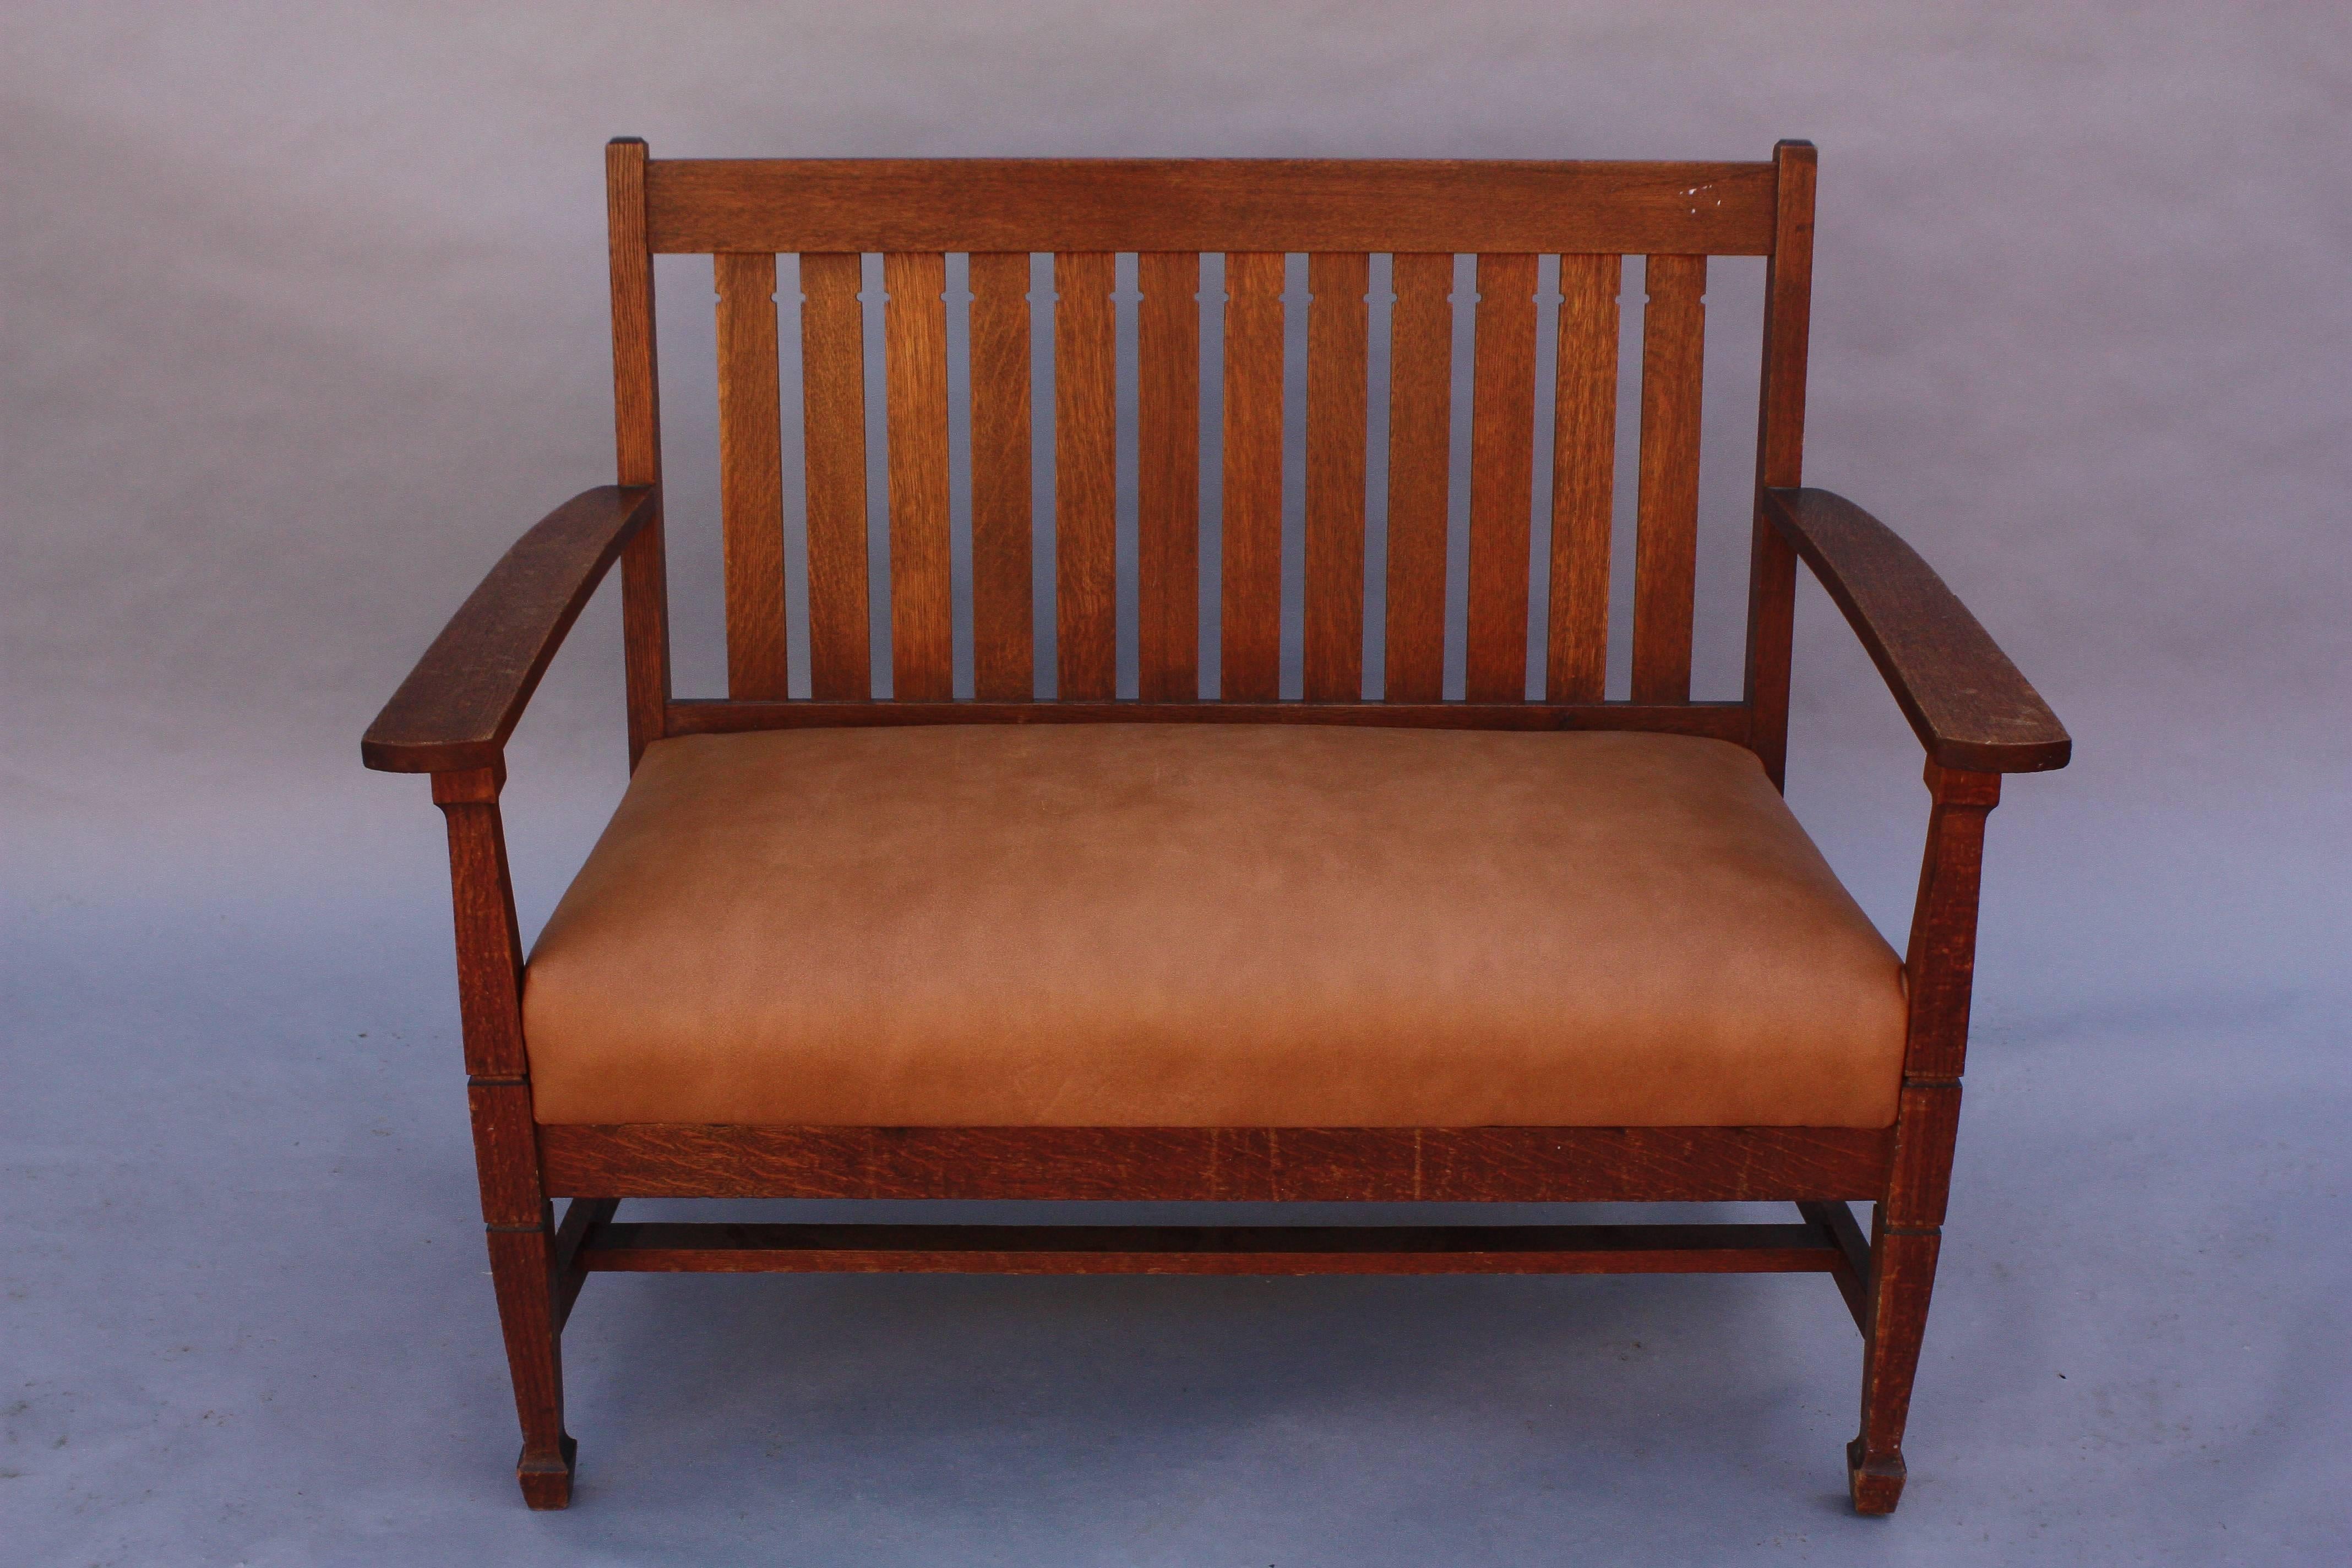 Early 20th Century 1910 Arts & Crafts Settle